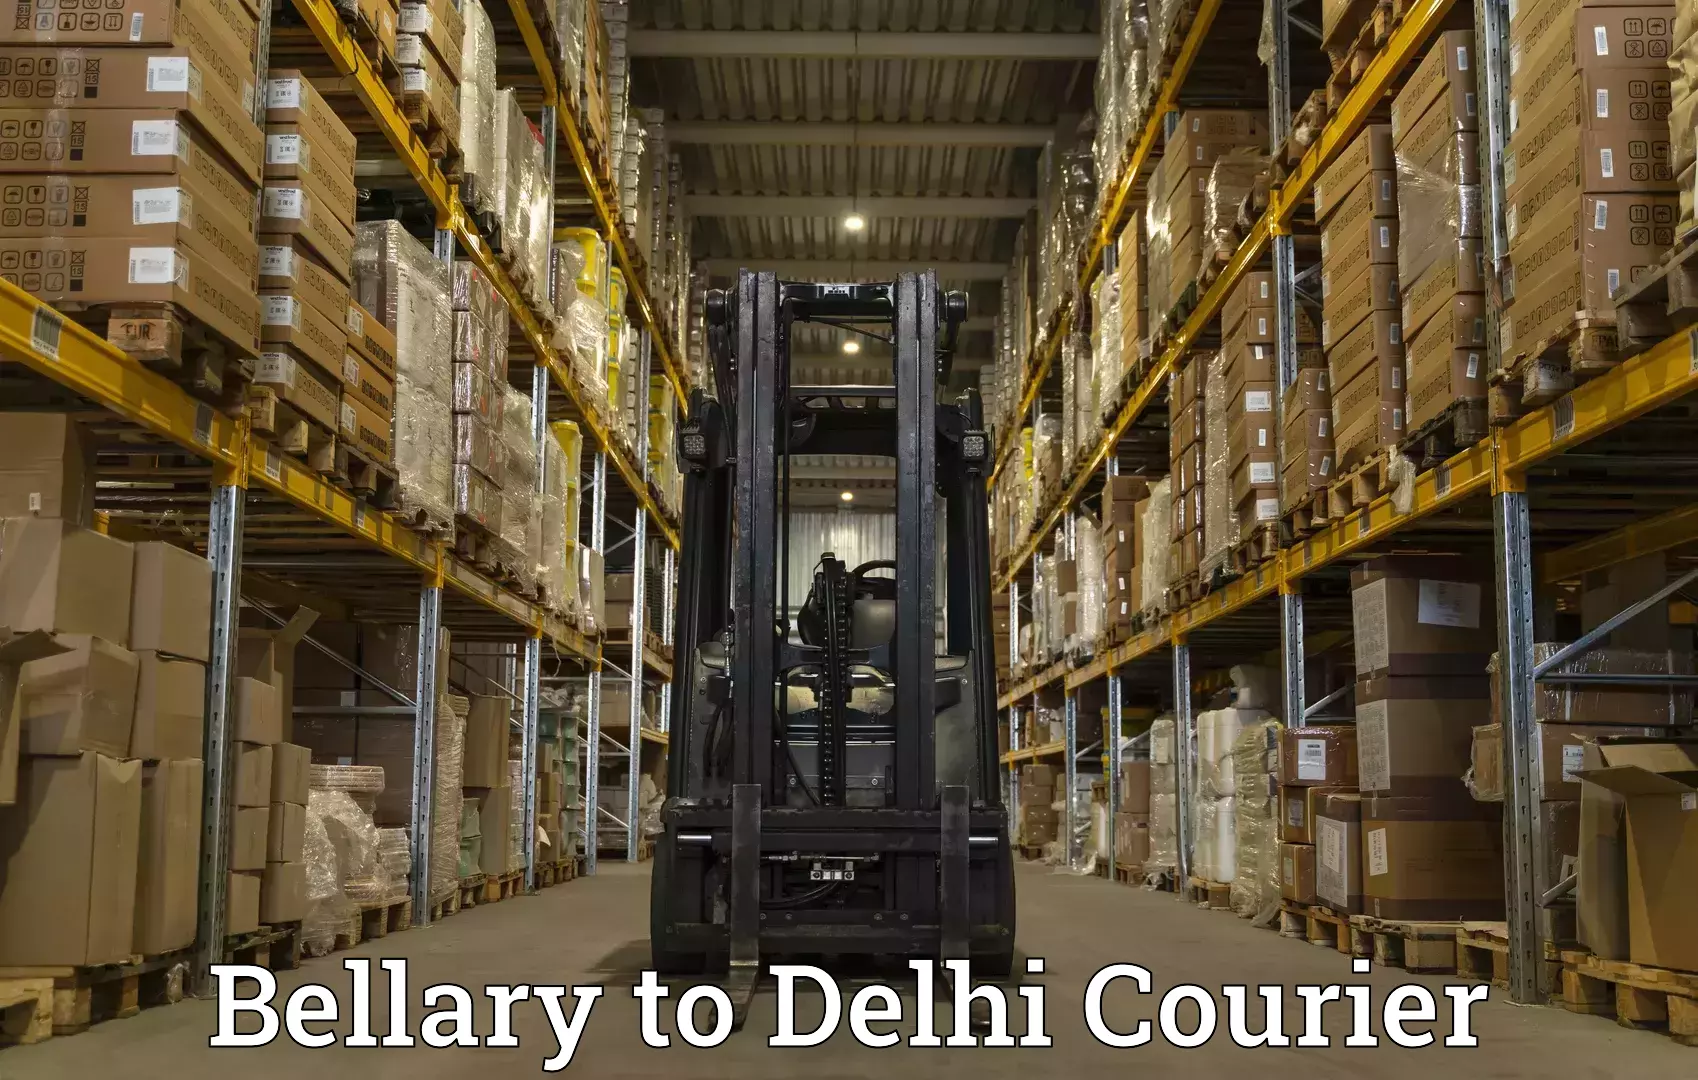 Package delivery network Bellary to Lodhi Road